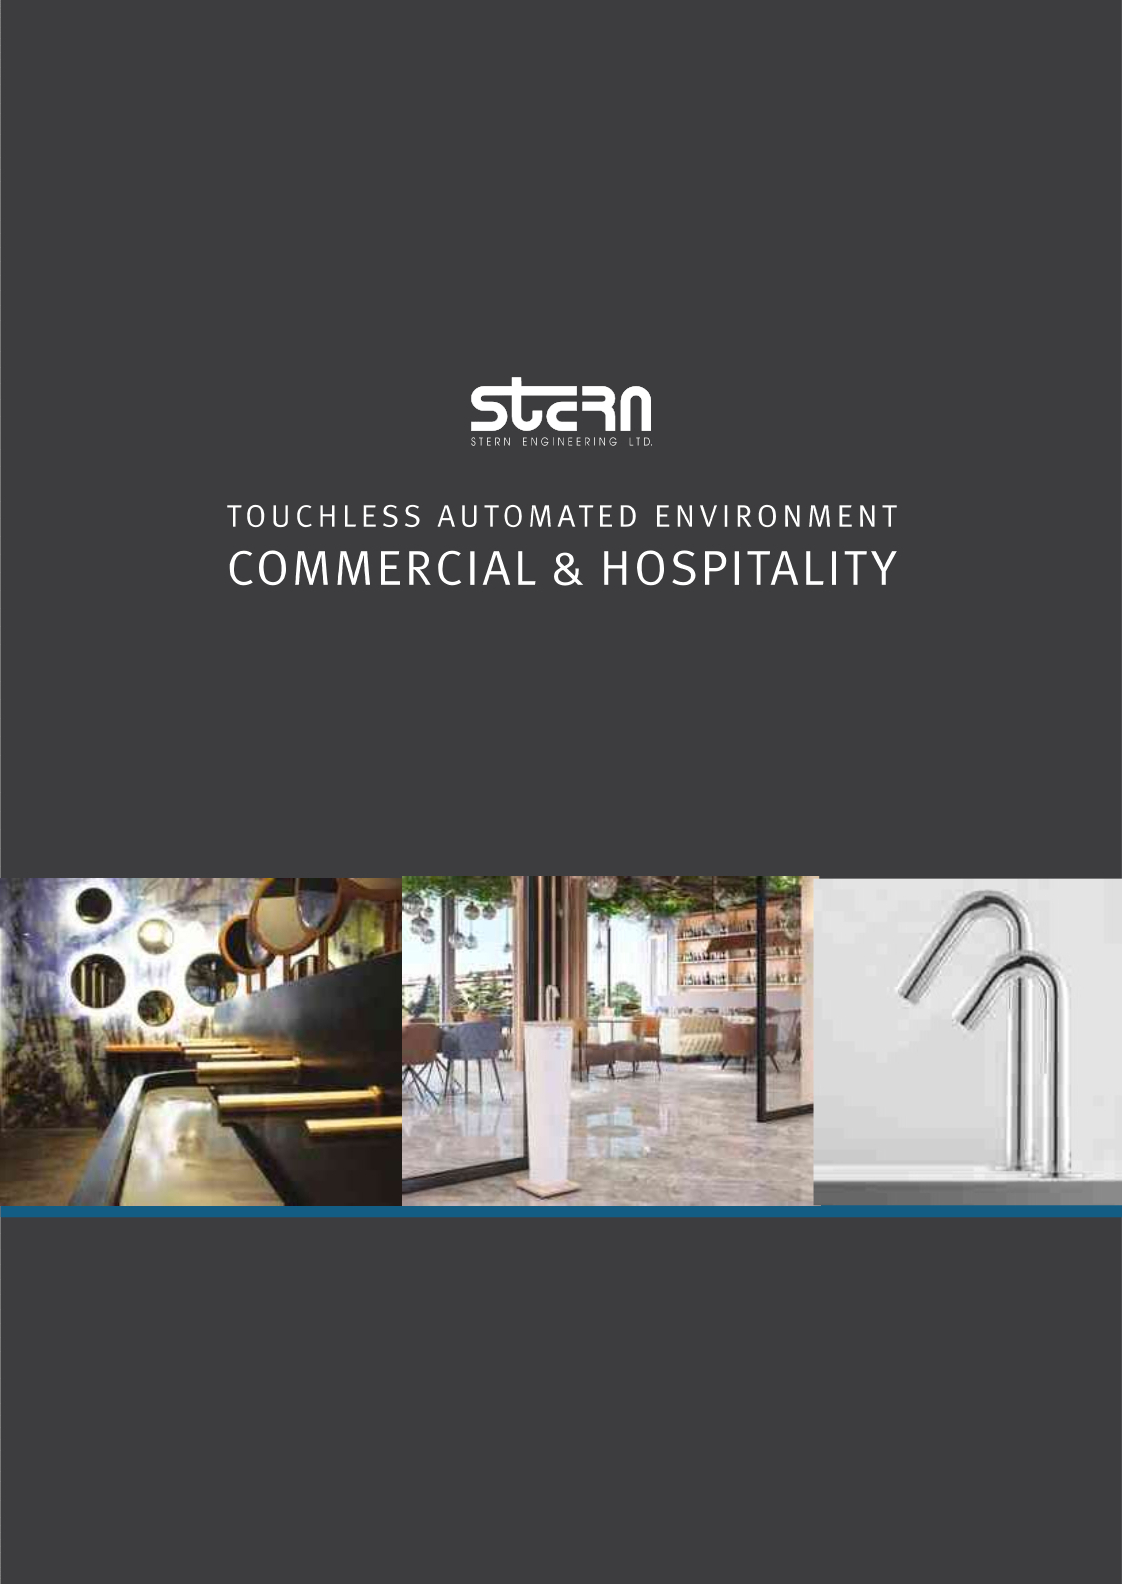 Touchless automated environment - commercial and hospitality